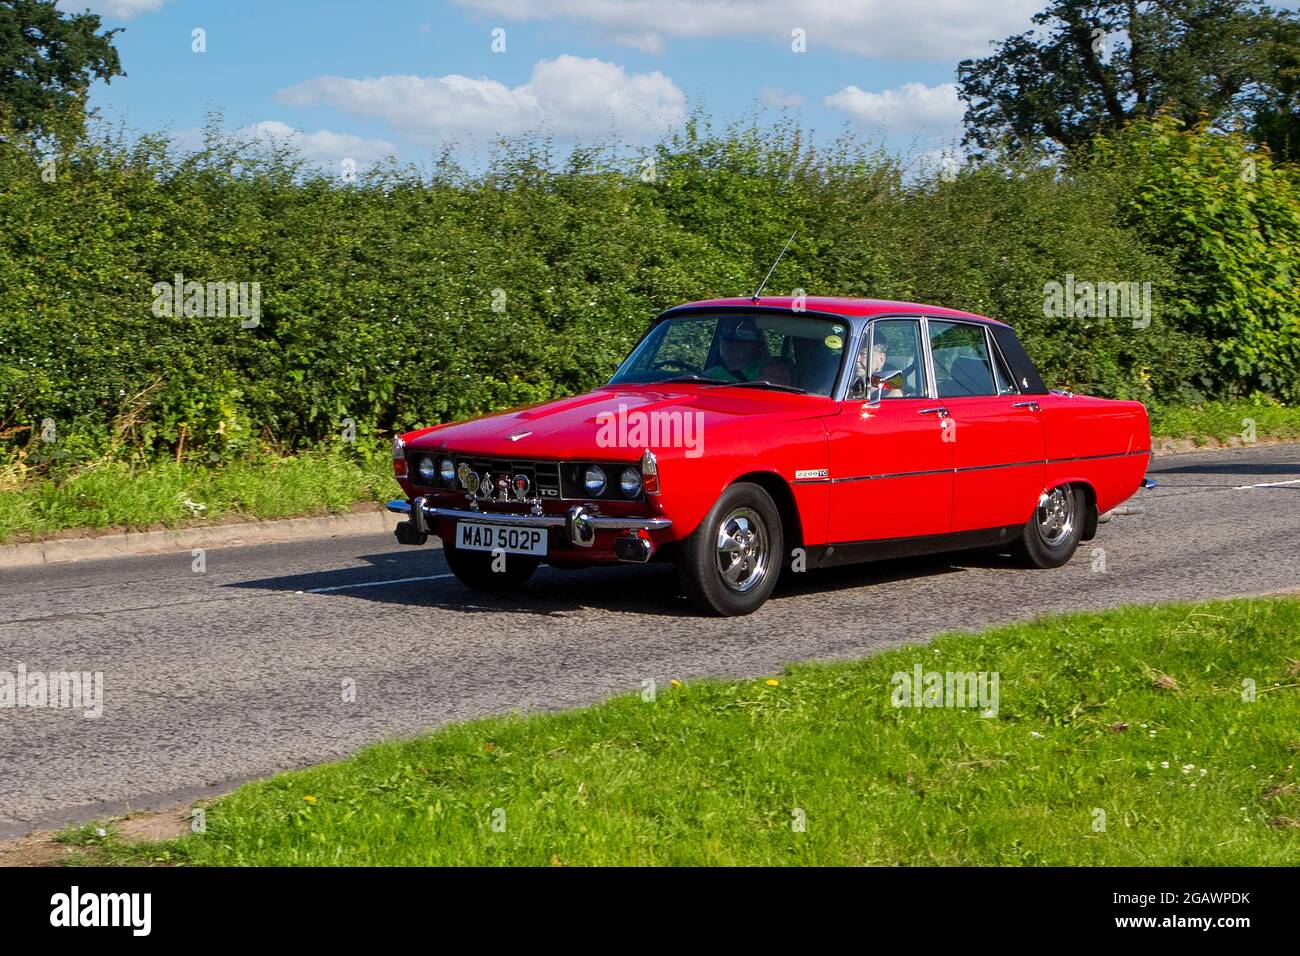 1976, 70s, 1970s red Rover P6 saloon classic vintage car arriving at the Capesthorne Hall classic car show. Stock Photo